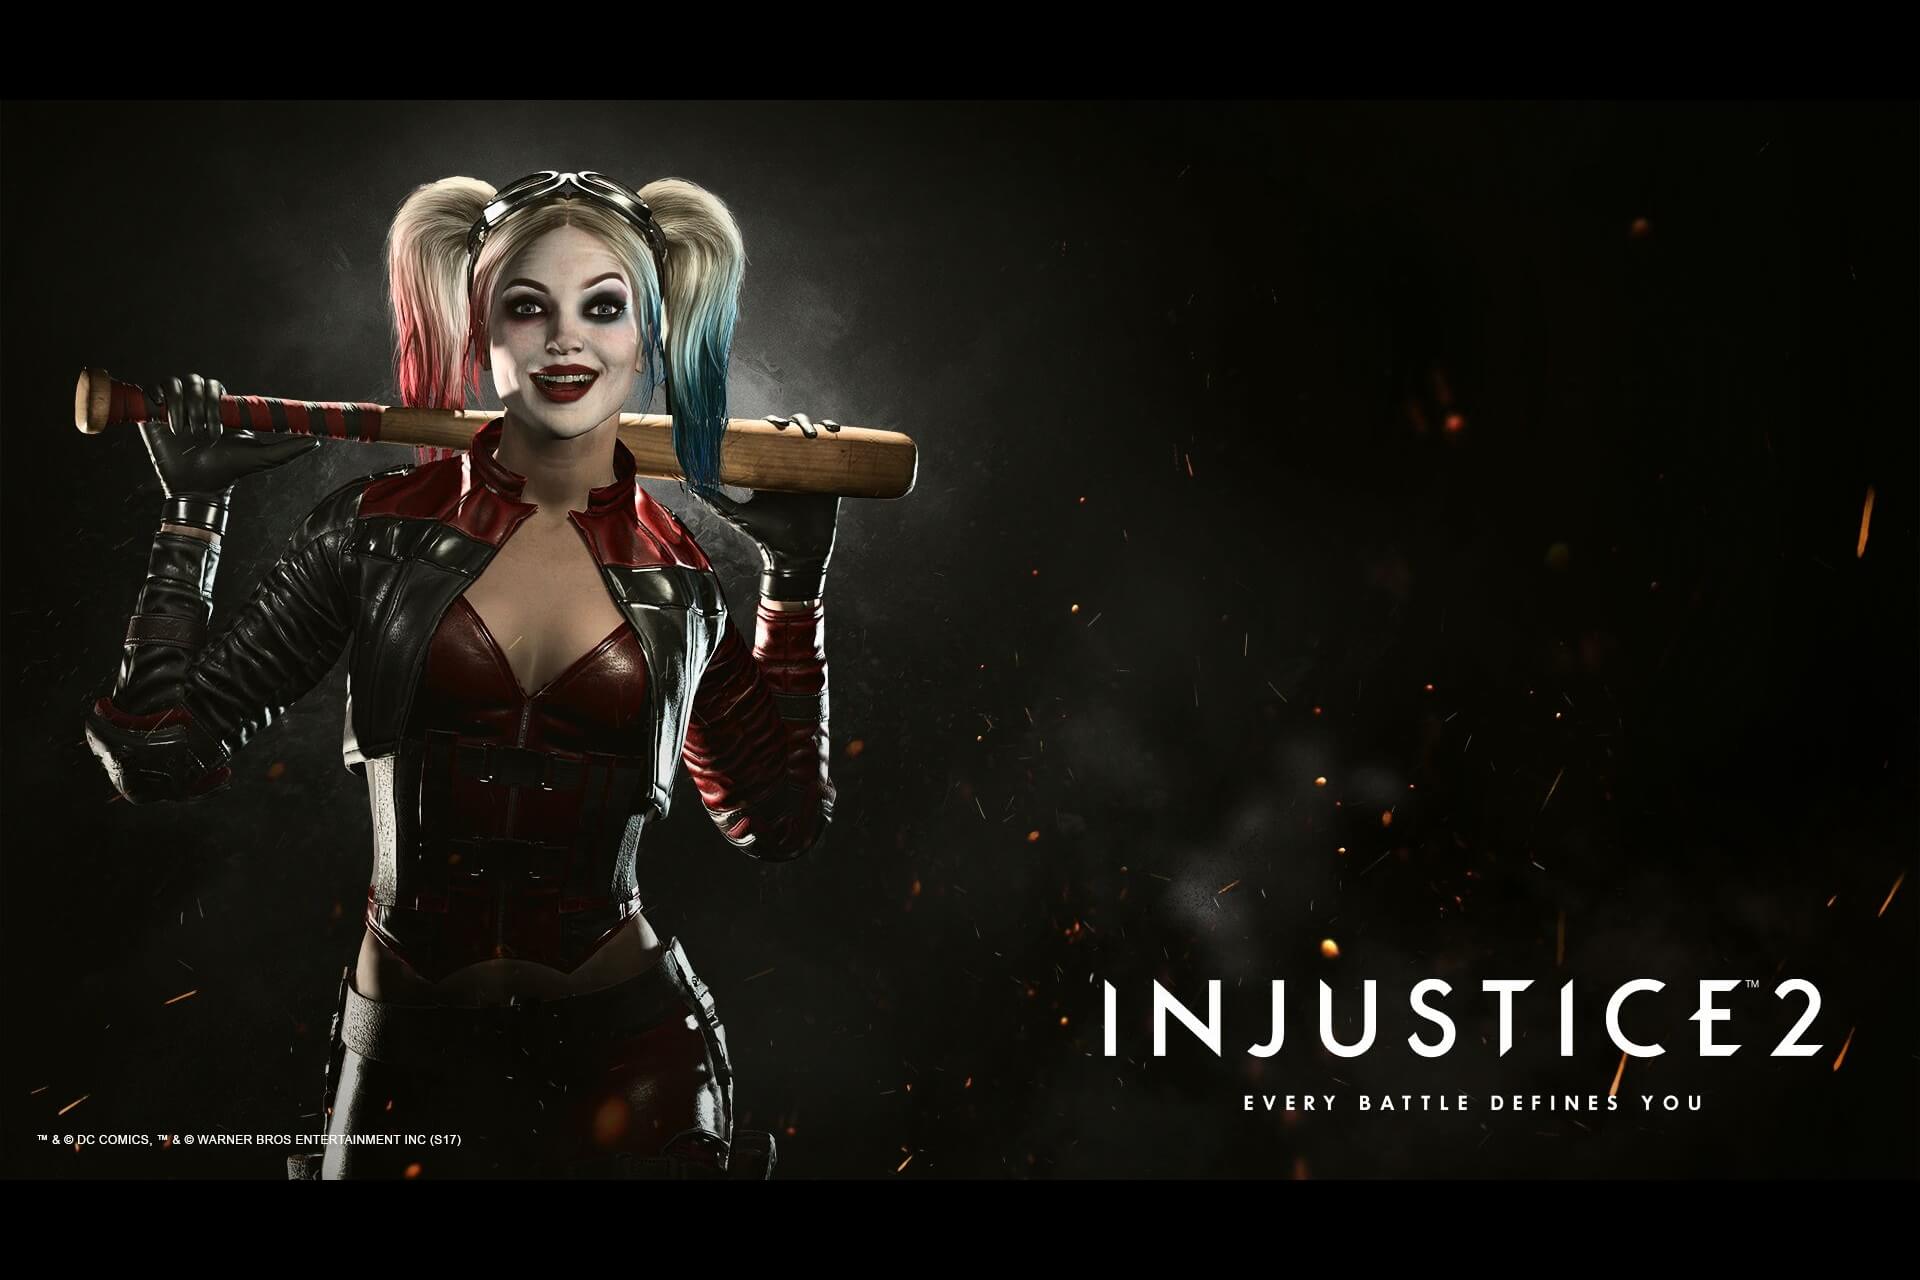 Injustice 2 pay for DLC